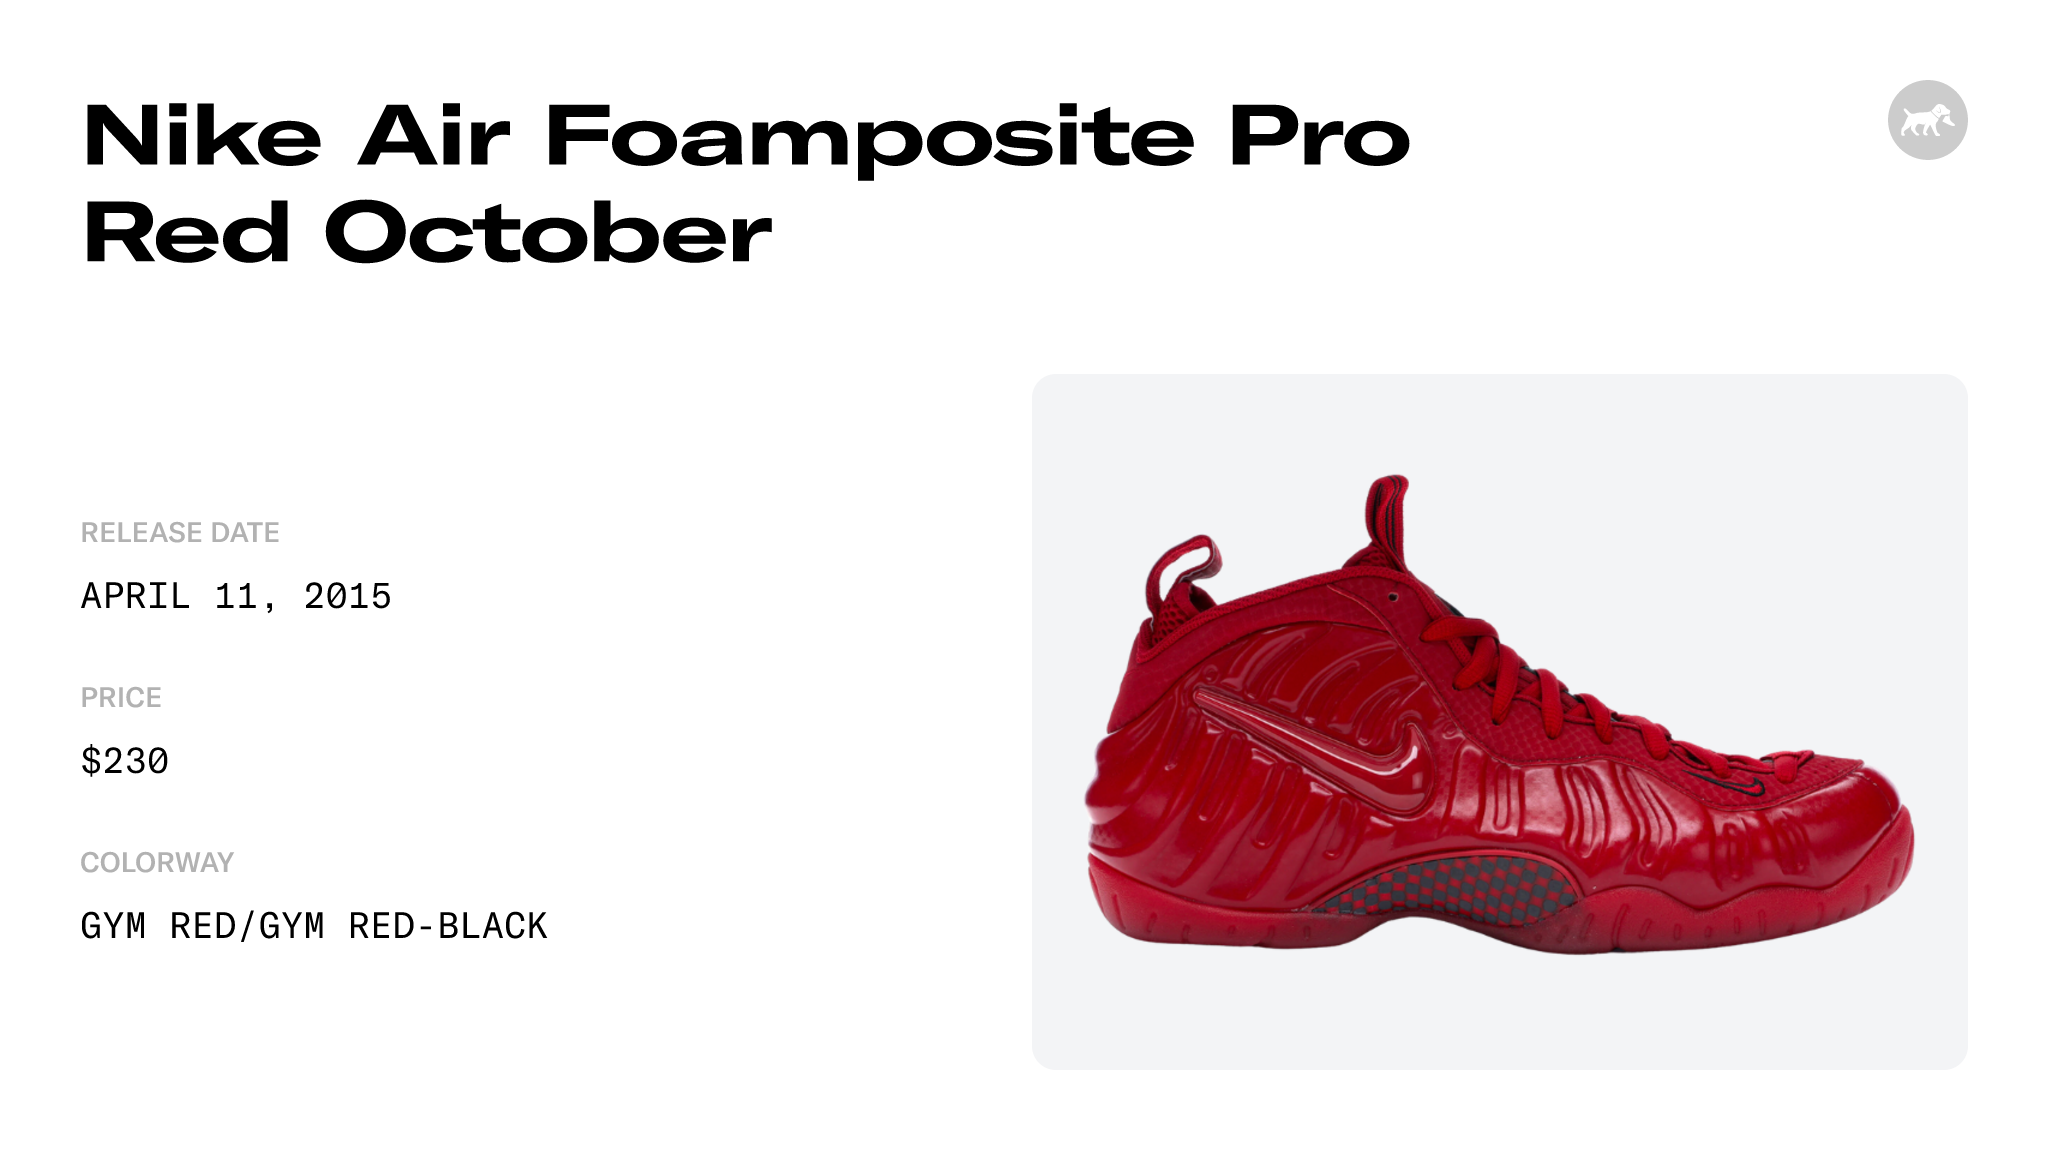 Nike Air Foamposite Pro Red October - 624041-603 Raffles and Release Date